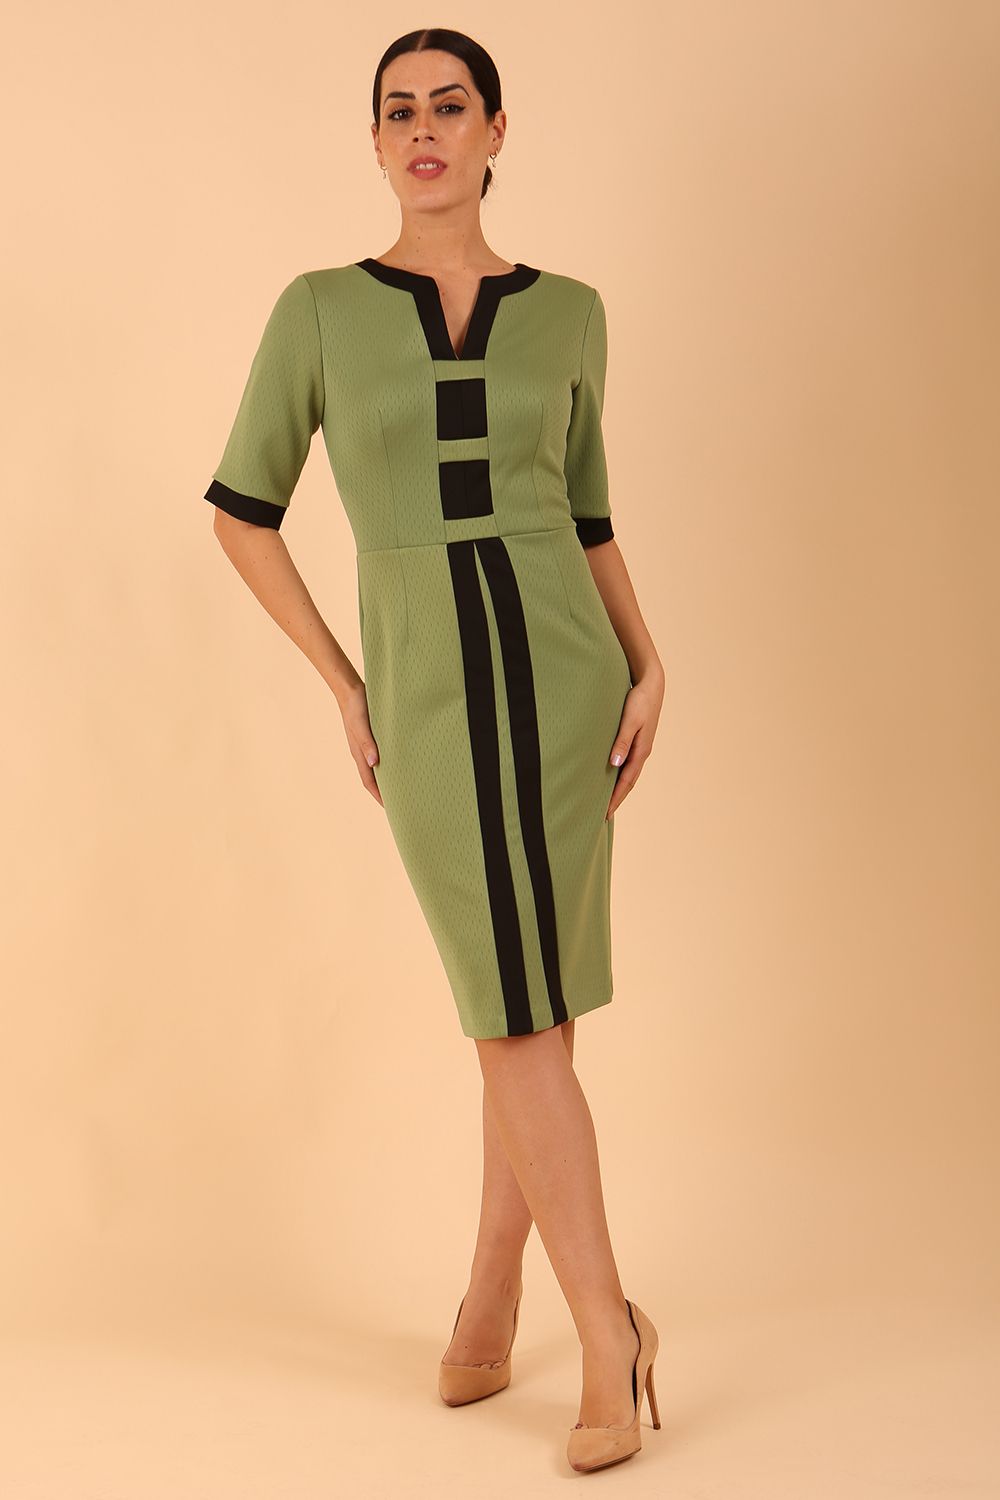 brunette model wearing Diva catwalk goggle pencil dress with short sleeve and v-neckline with contrasted design across body in radiant yellow front